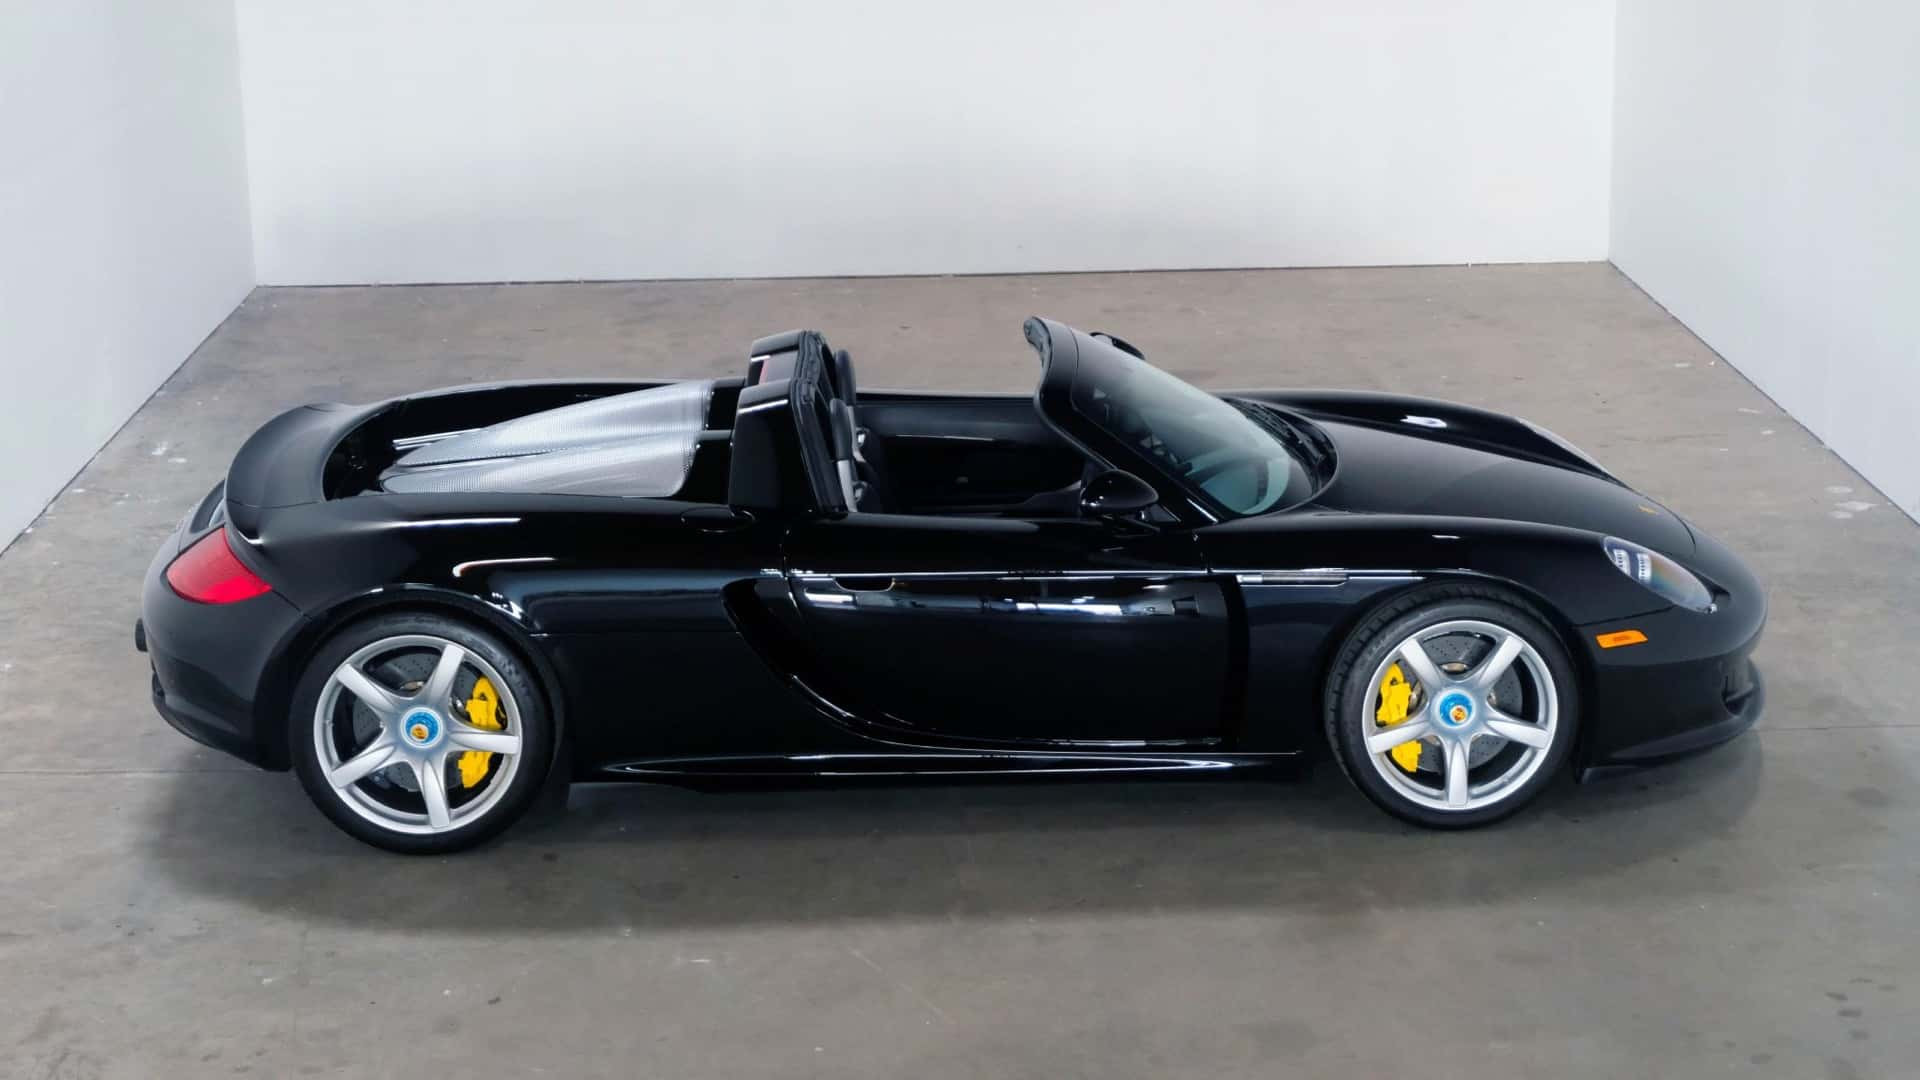 2004-porsche-carrera-gt-once-owned-by-jerry-seinfeld-photo-via-bring-a-trailer_100830926_h-min.jpg